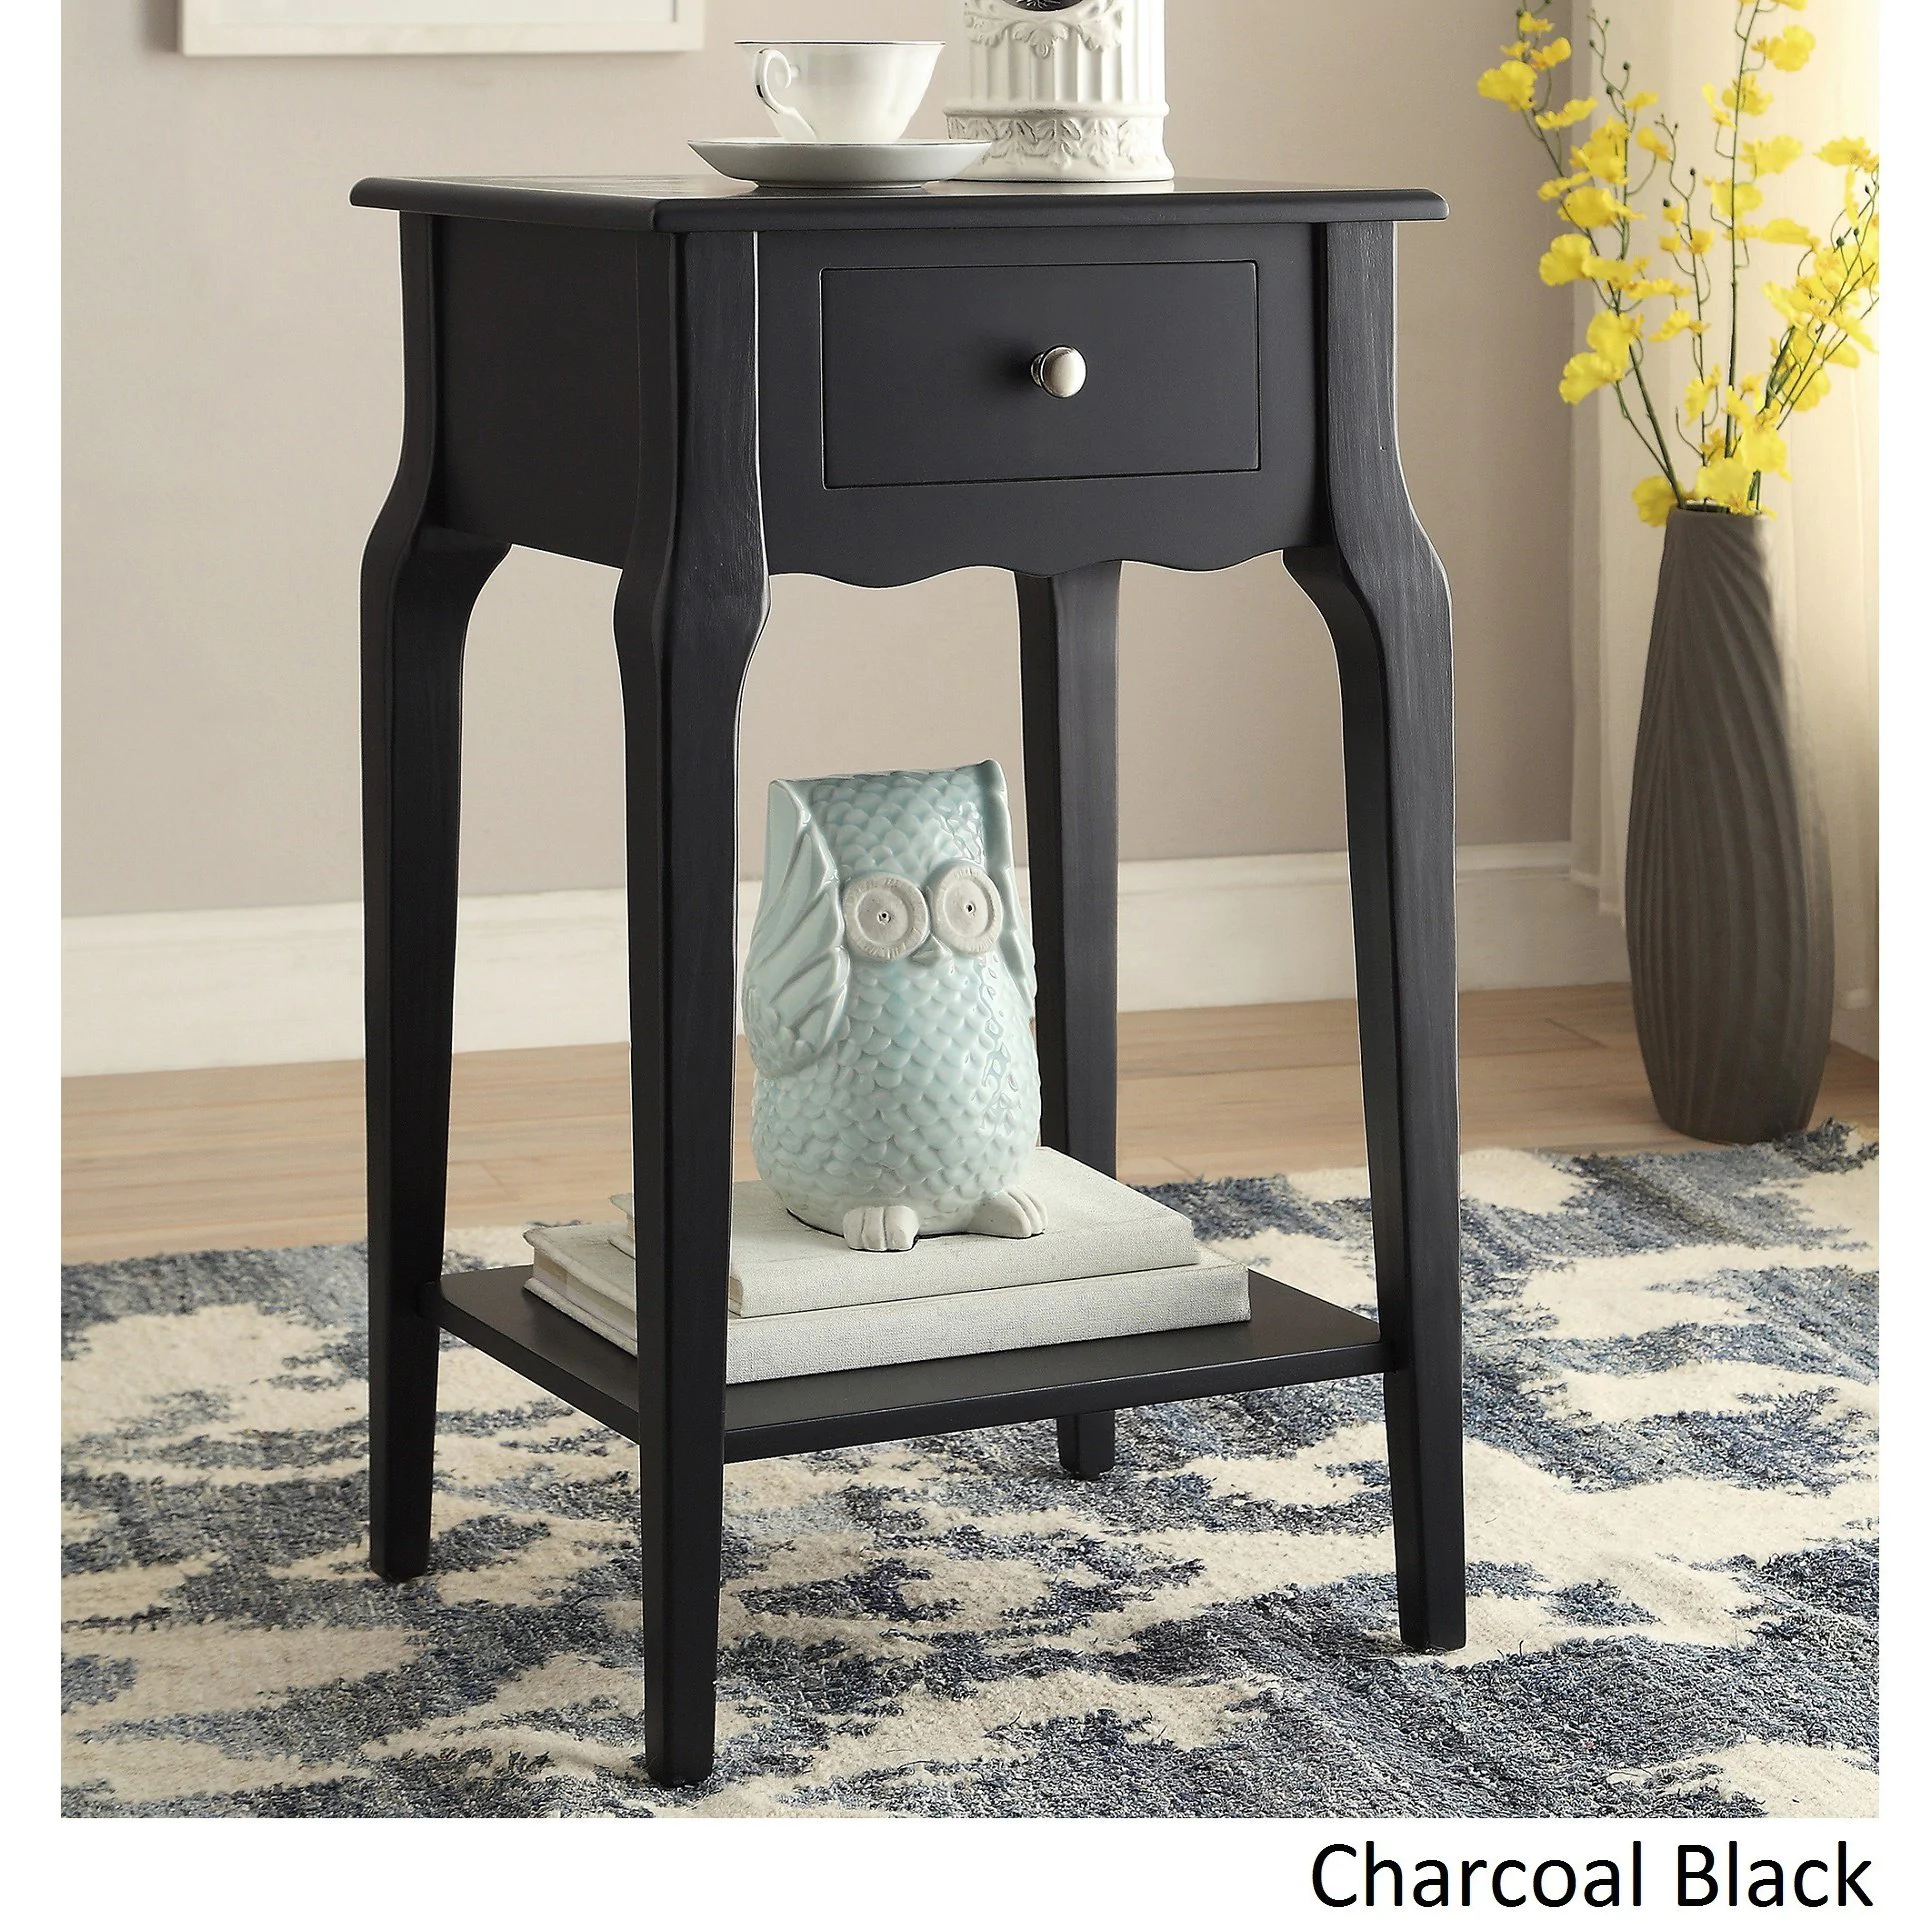 daniella drawer wood storage accent end table inspire bold black room essentials free shipping today round decorative cover battery powered lamps entry and mirror set cherry